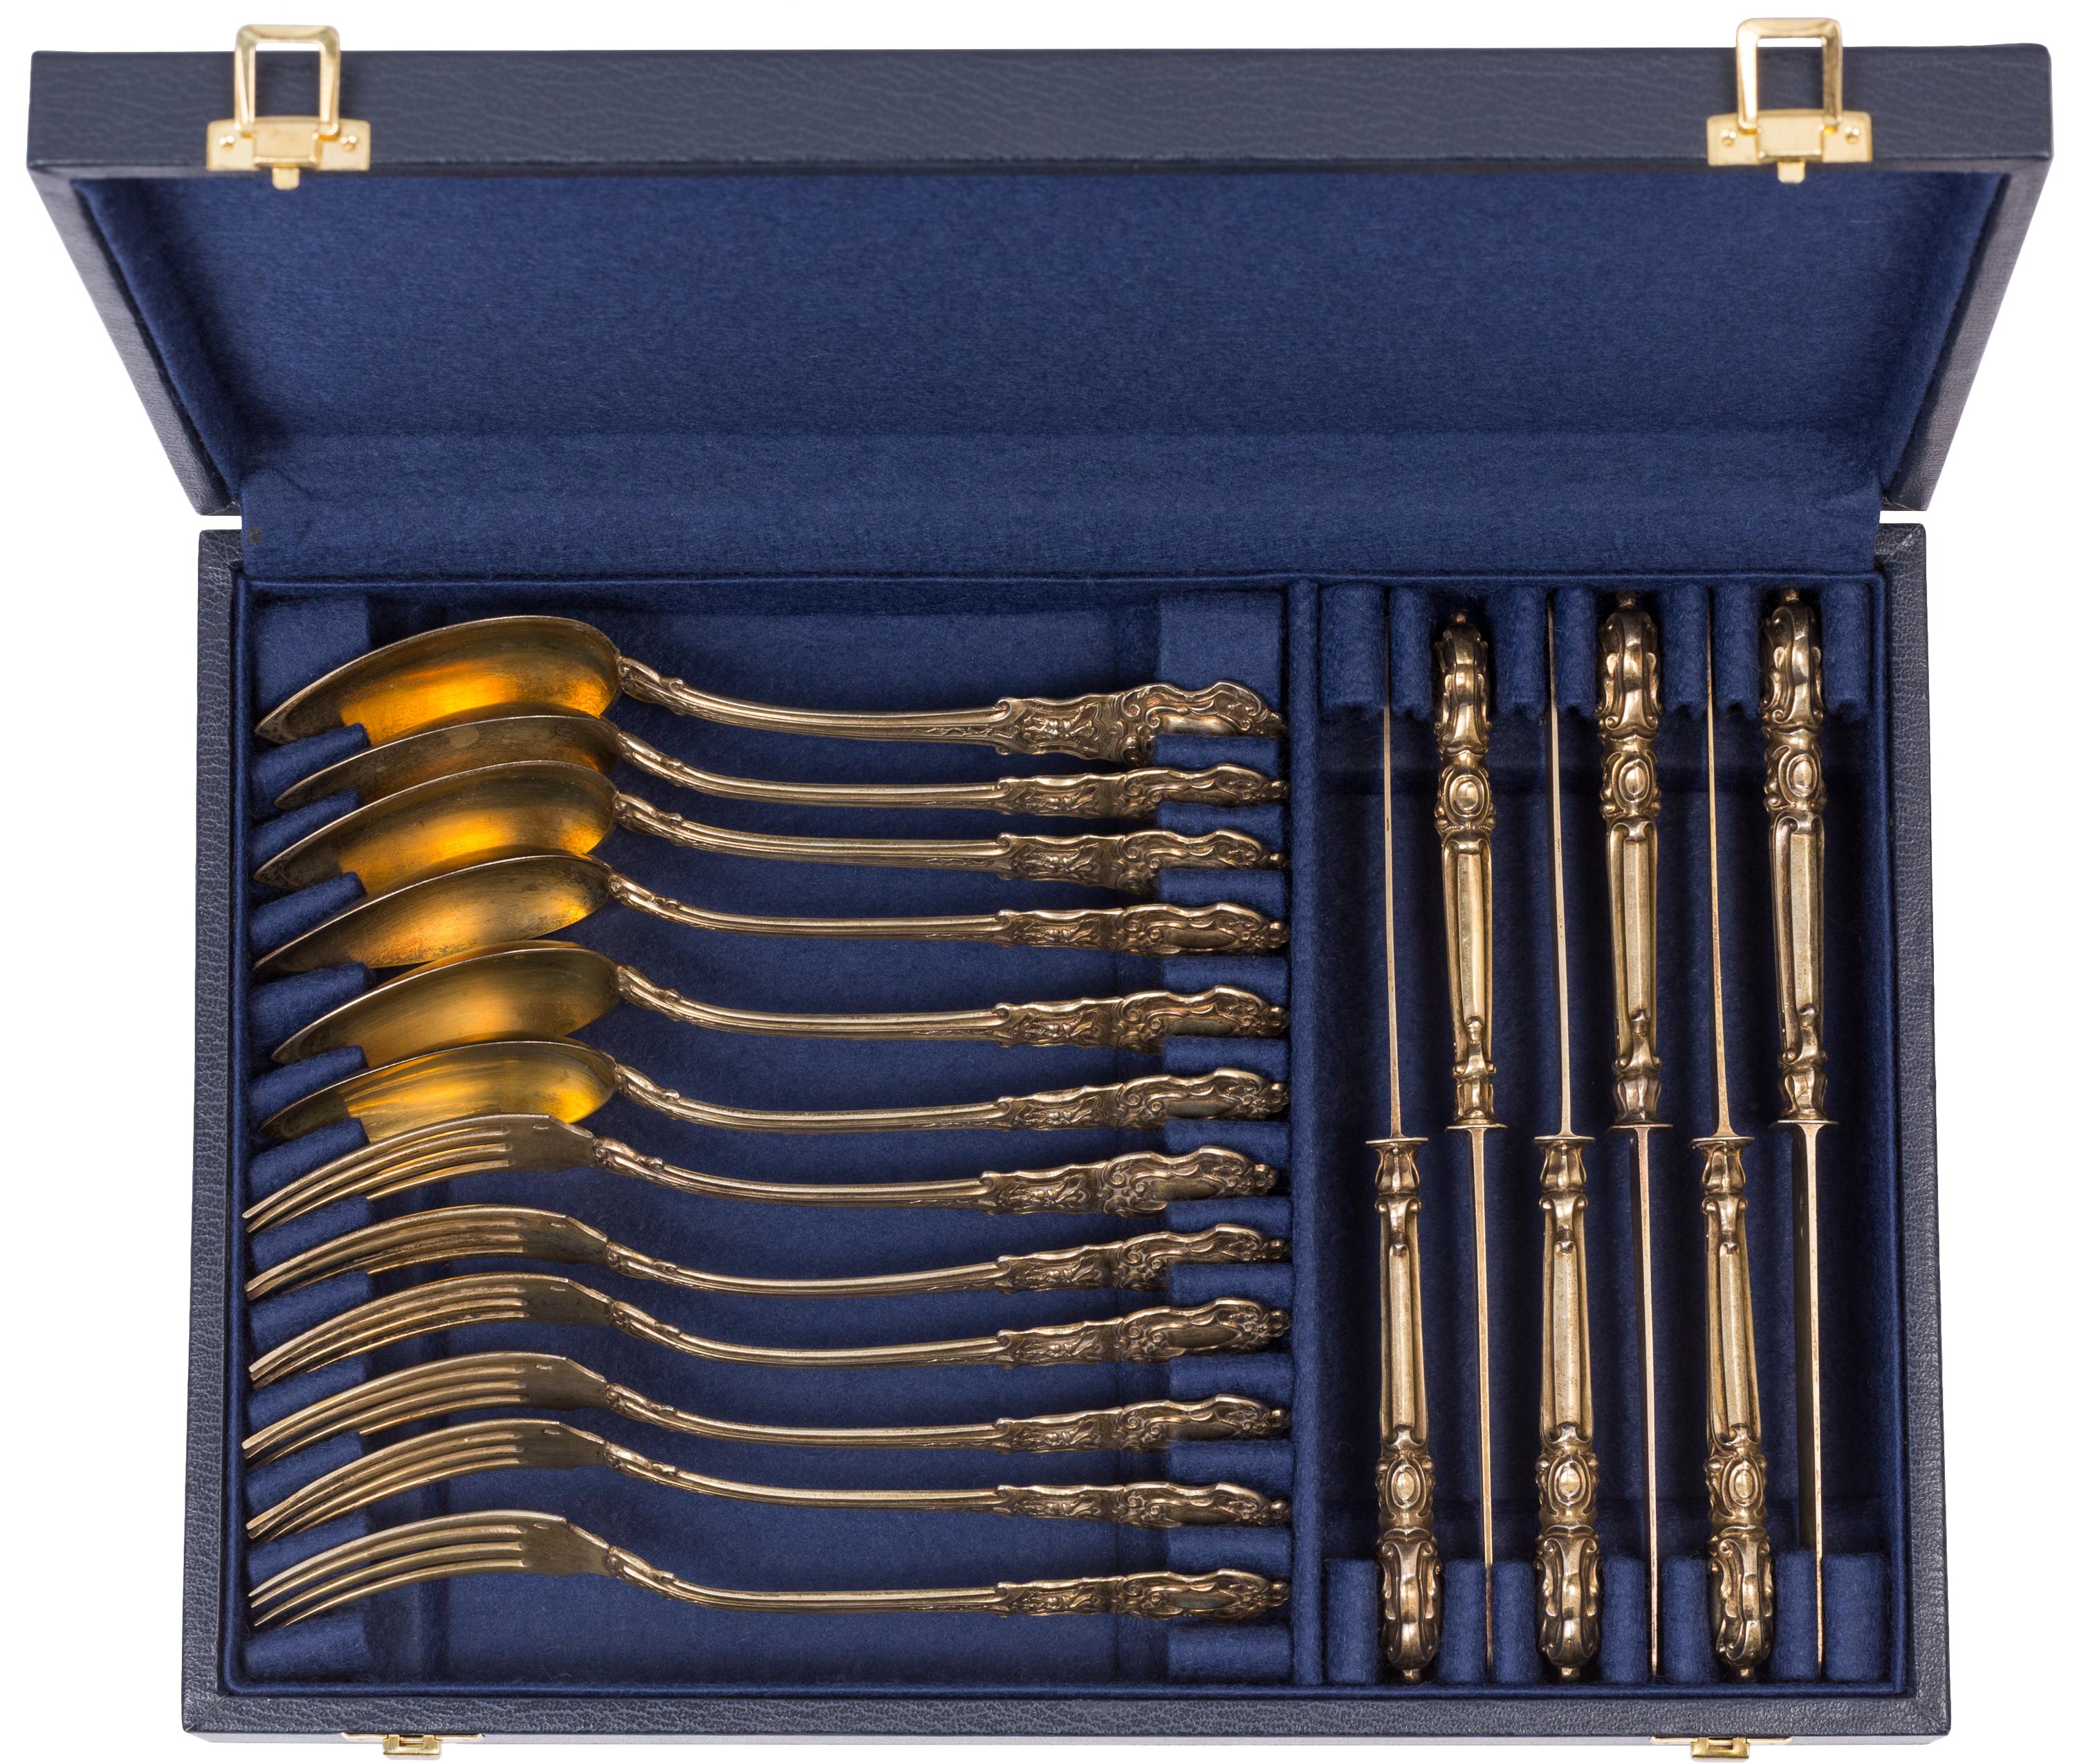 This charming 19th century French 18-piece cased dessert silverware / flatware set, with its unique, slightly grotesque satyr mask motif and warm vermeil gold tone, carries an interesting and informative set of hallmarks. 

All six forks, six